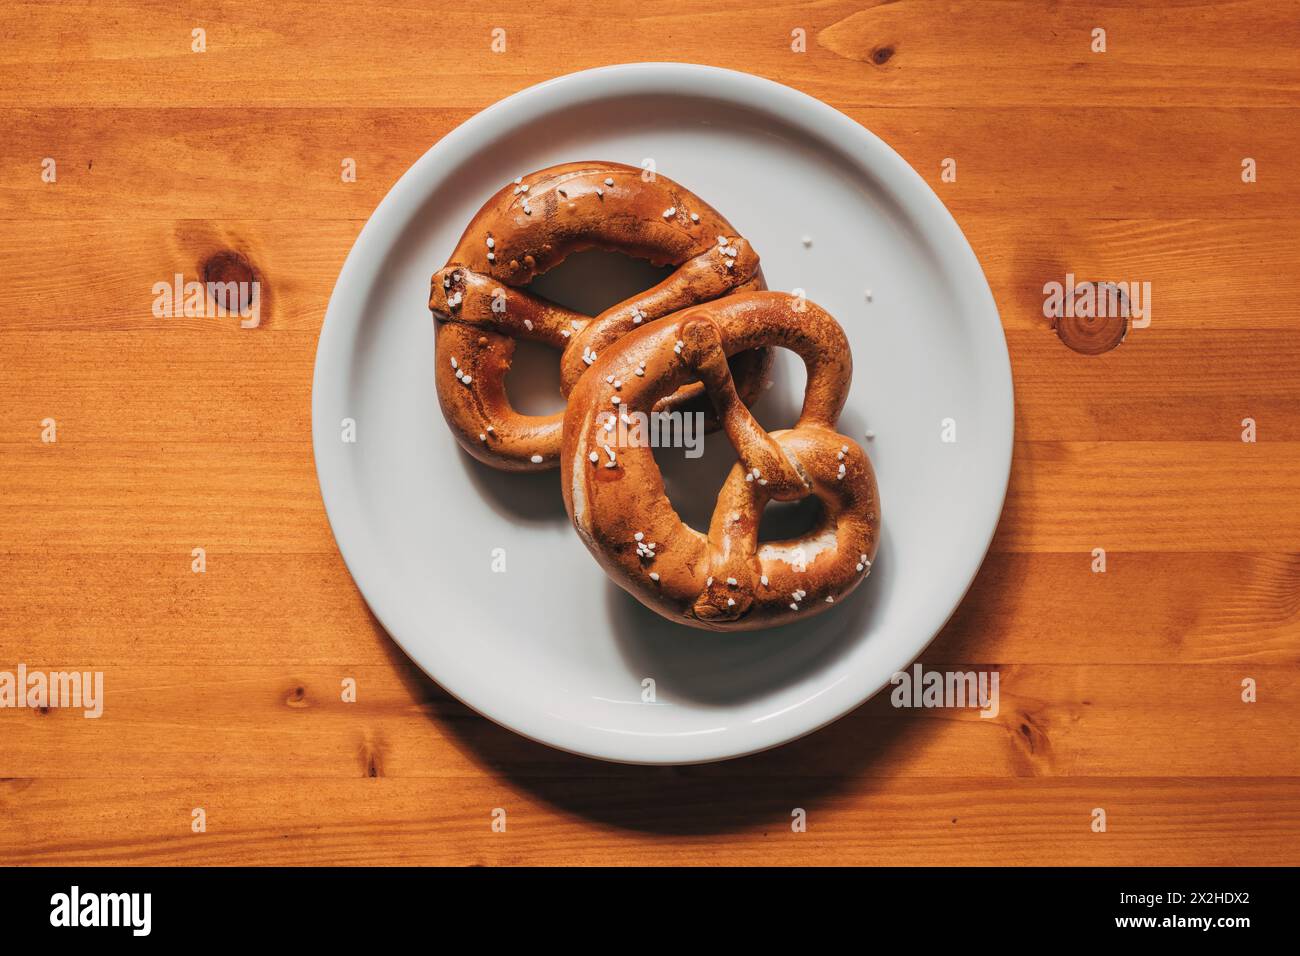 Top view of two freshly baked pretzels on a plate on wooden table Stock Photo